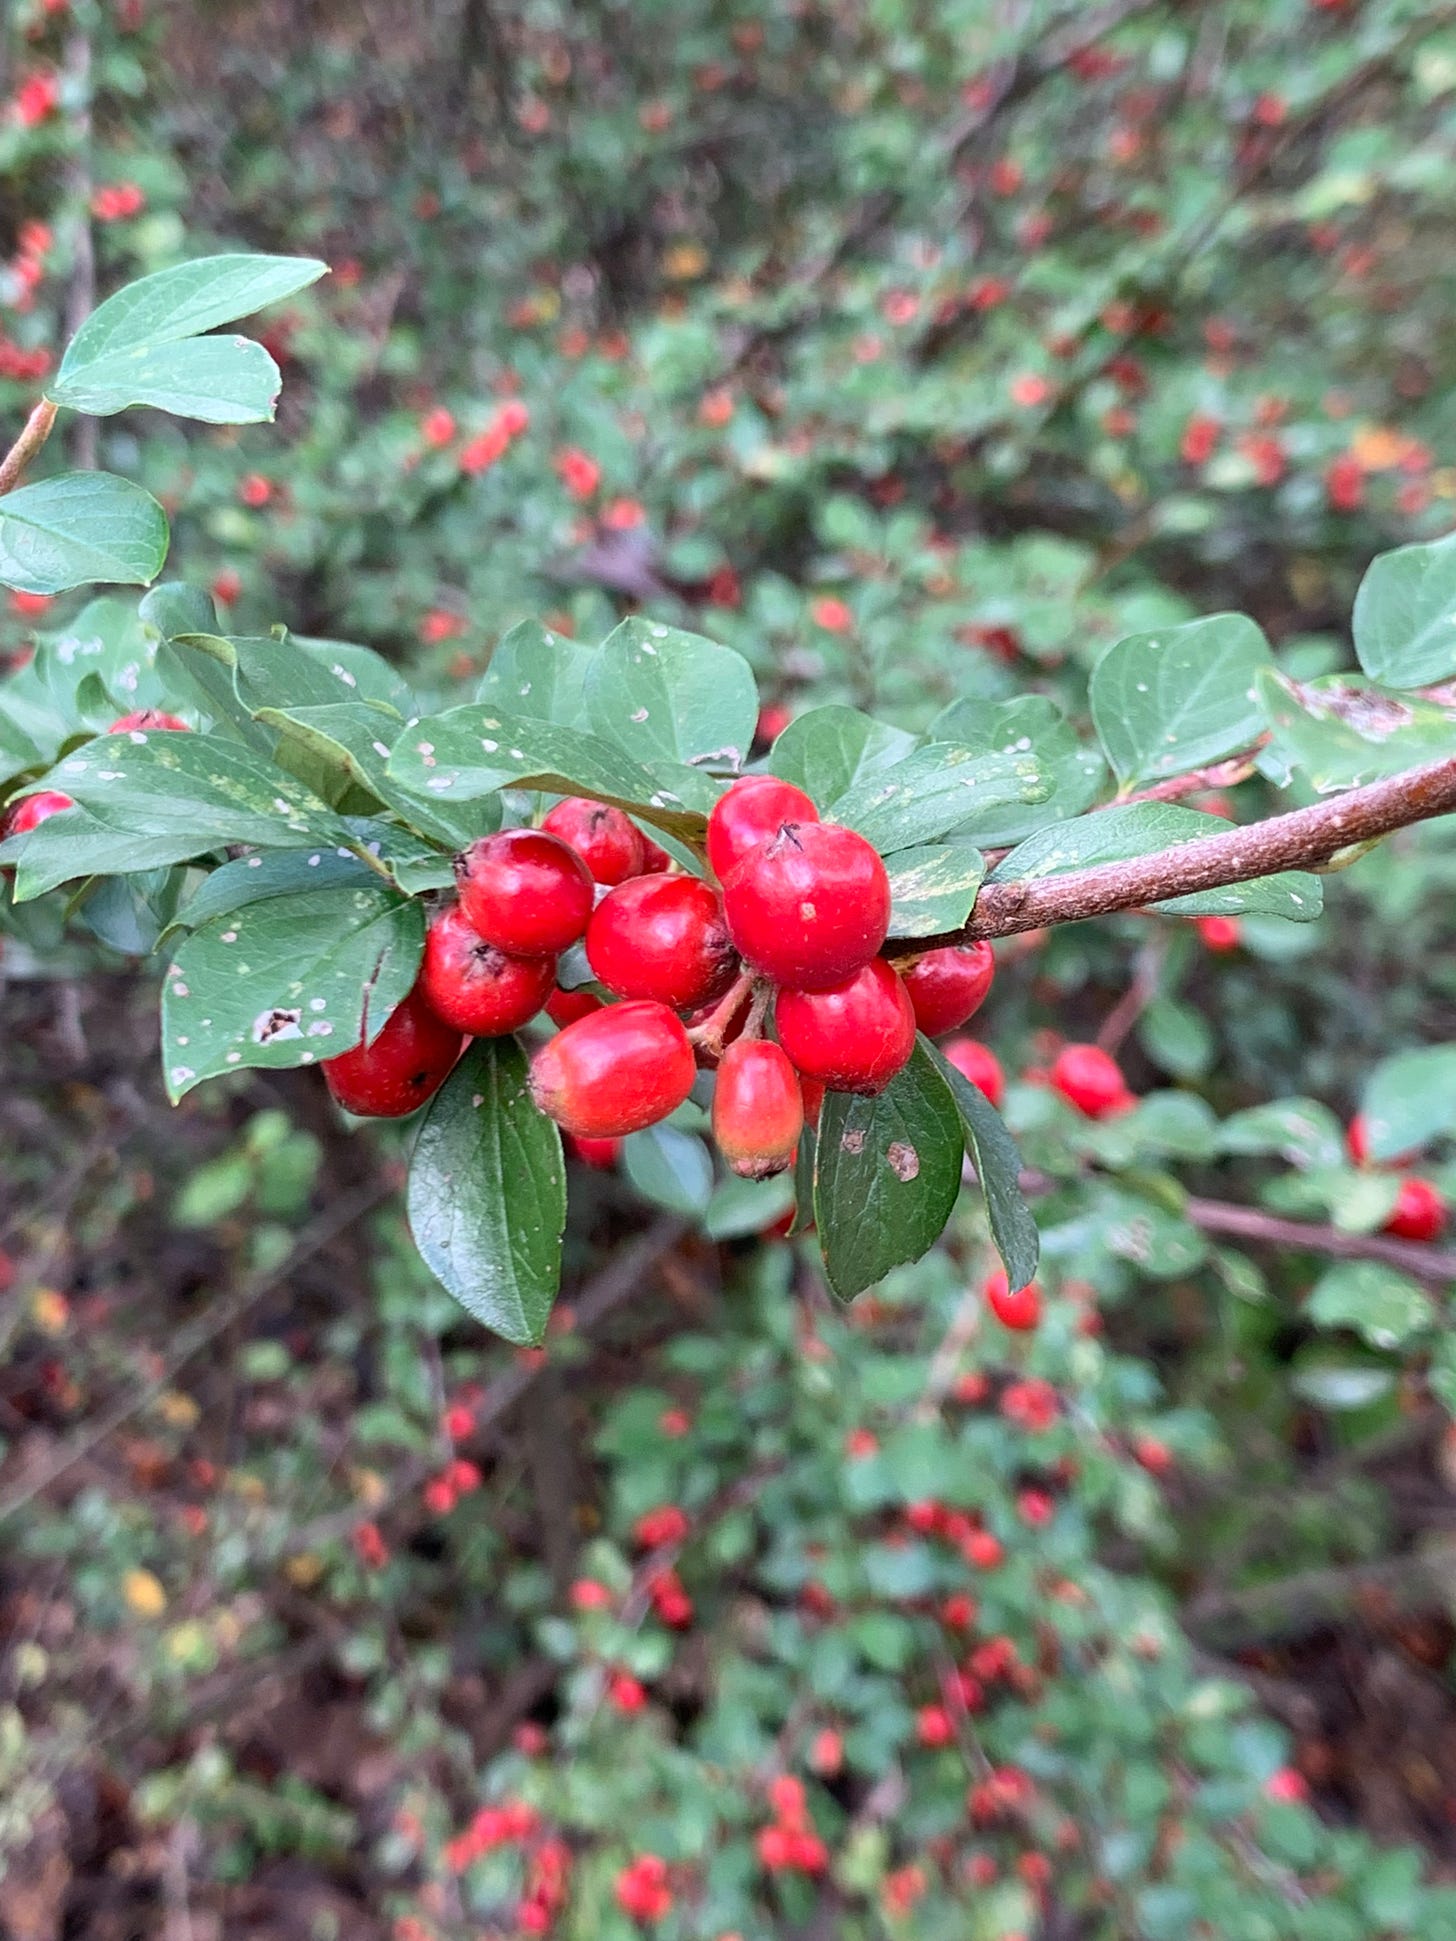 Very closeup photo of the scarlet globed fruit on a branch with several green leaves surrounding it.